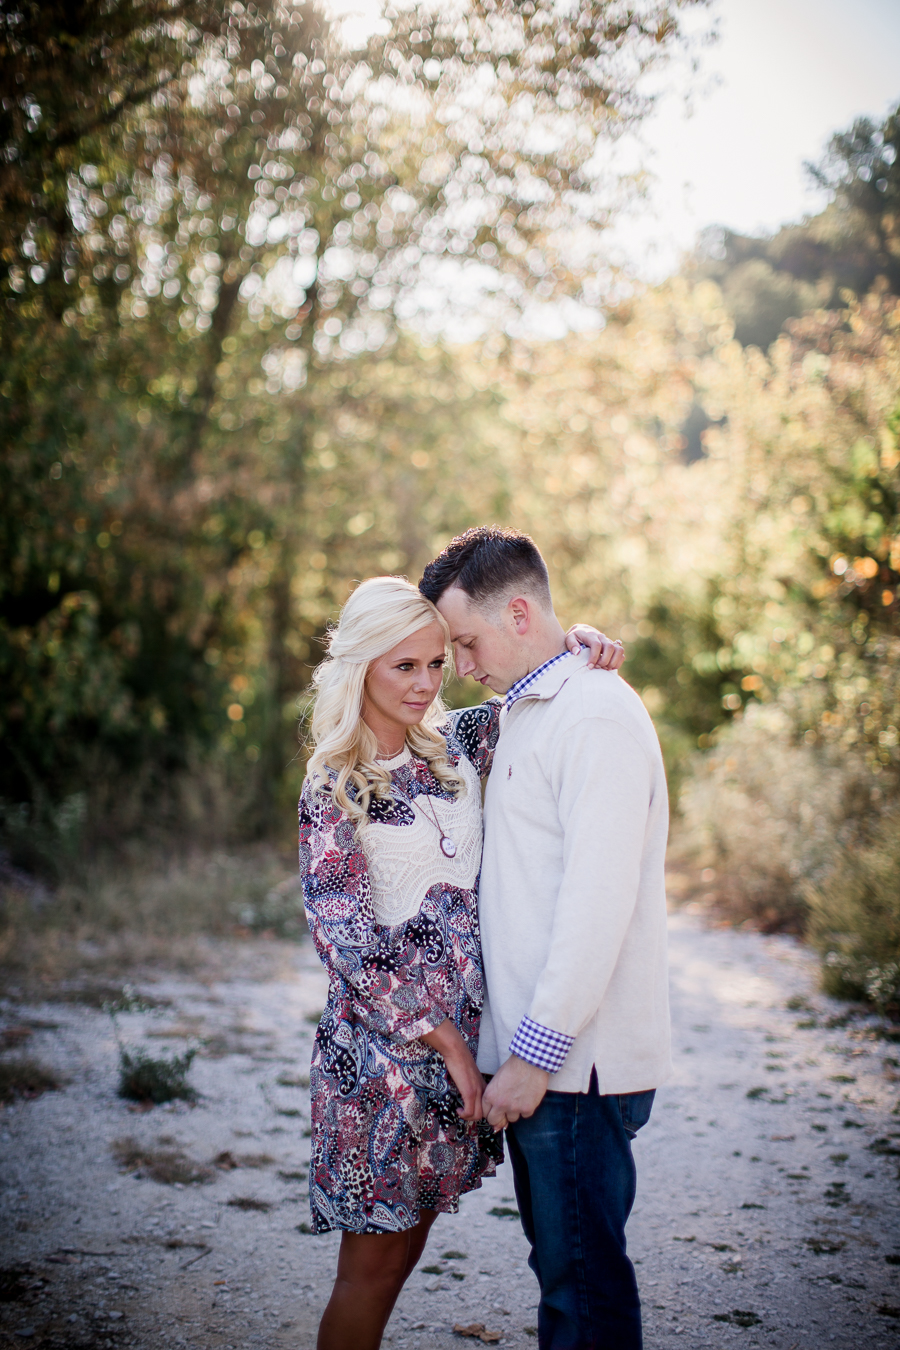 His forehead against her temple engagement photo by Knoxville Wedding Photographer, Amanda May Photos.